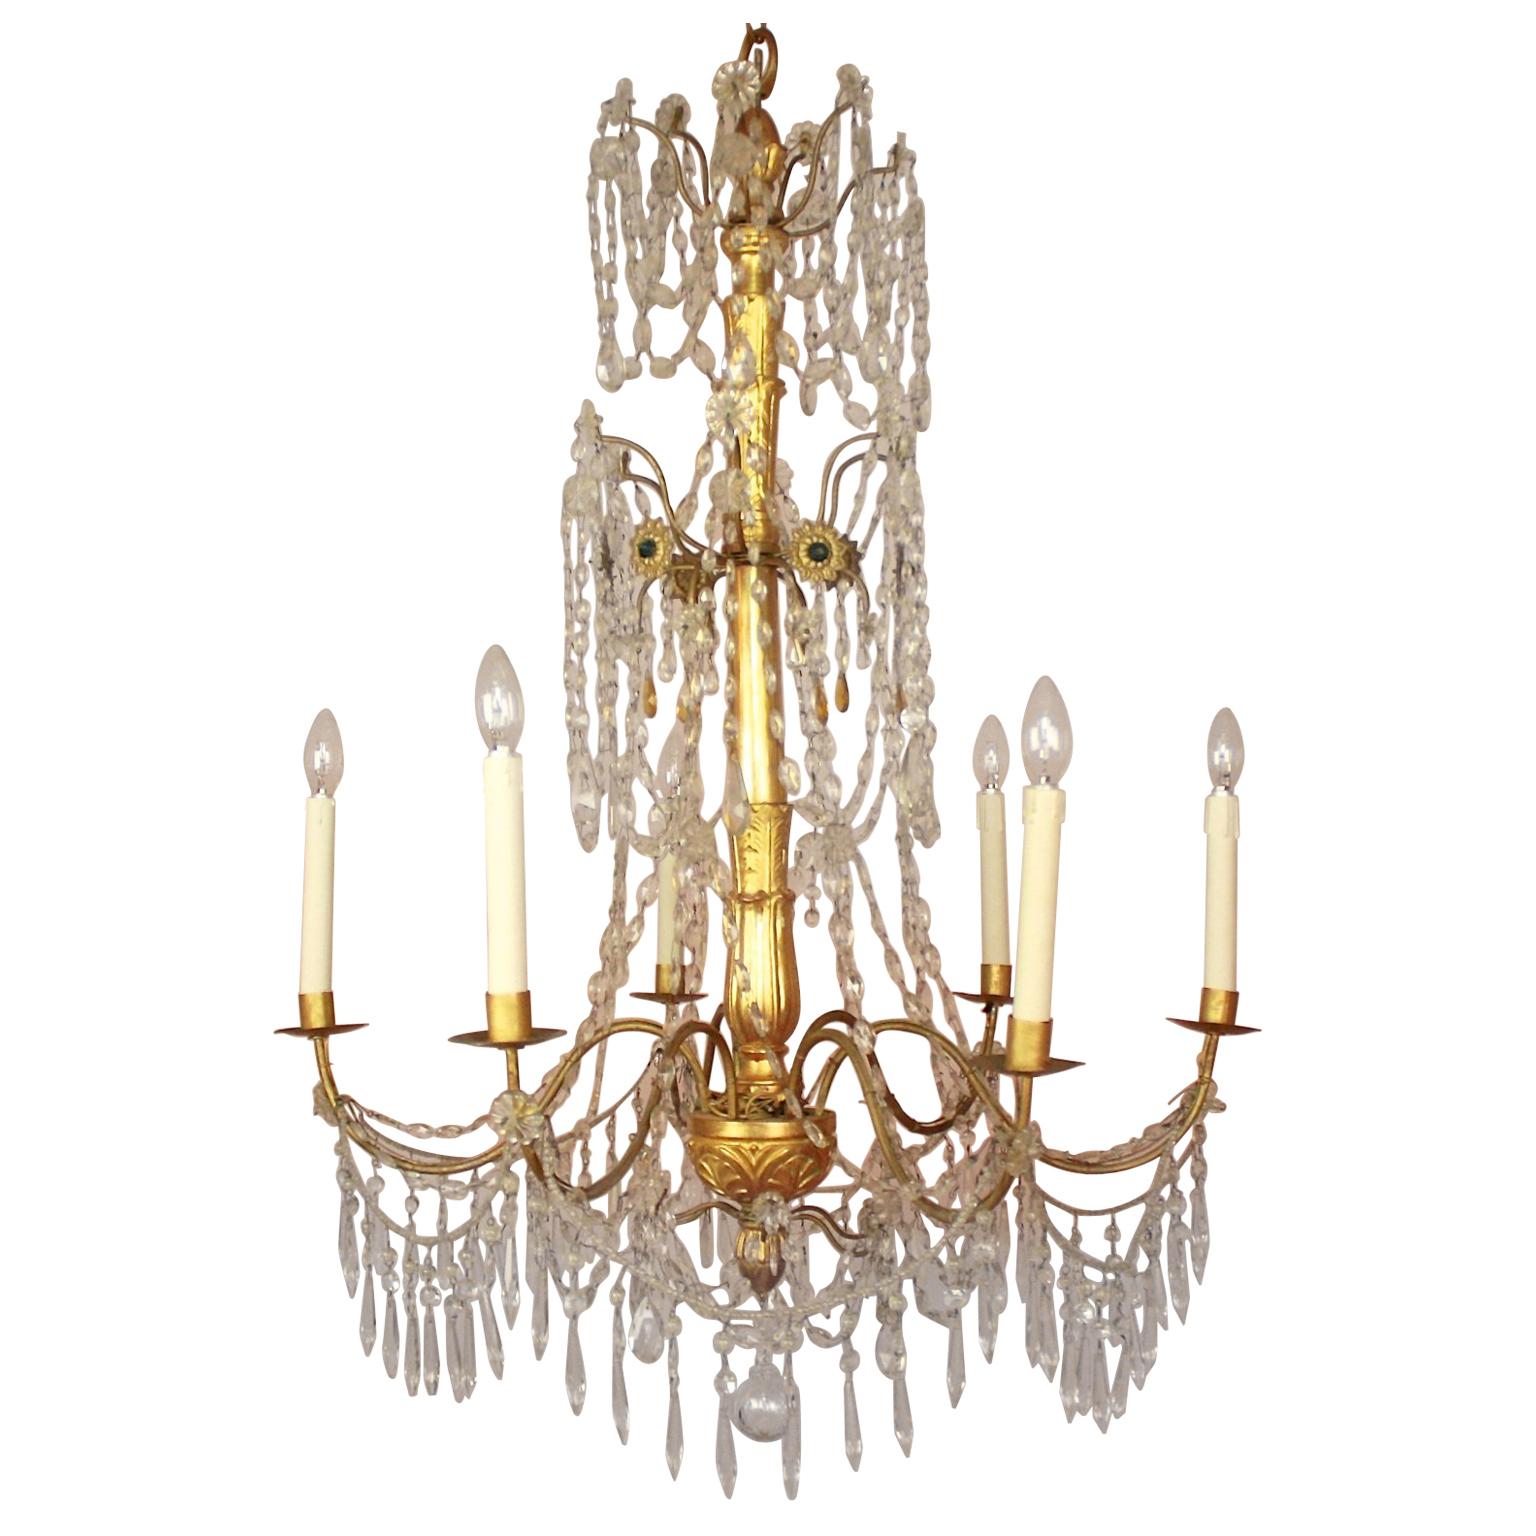 Pair of Late 18th Century Neoclassical Genoa/Italy Giltwood Crystal Chandeliers